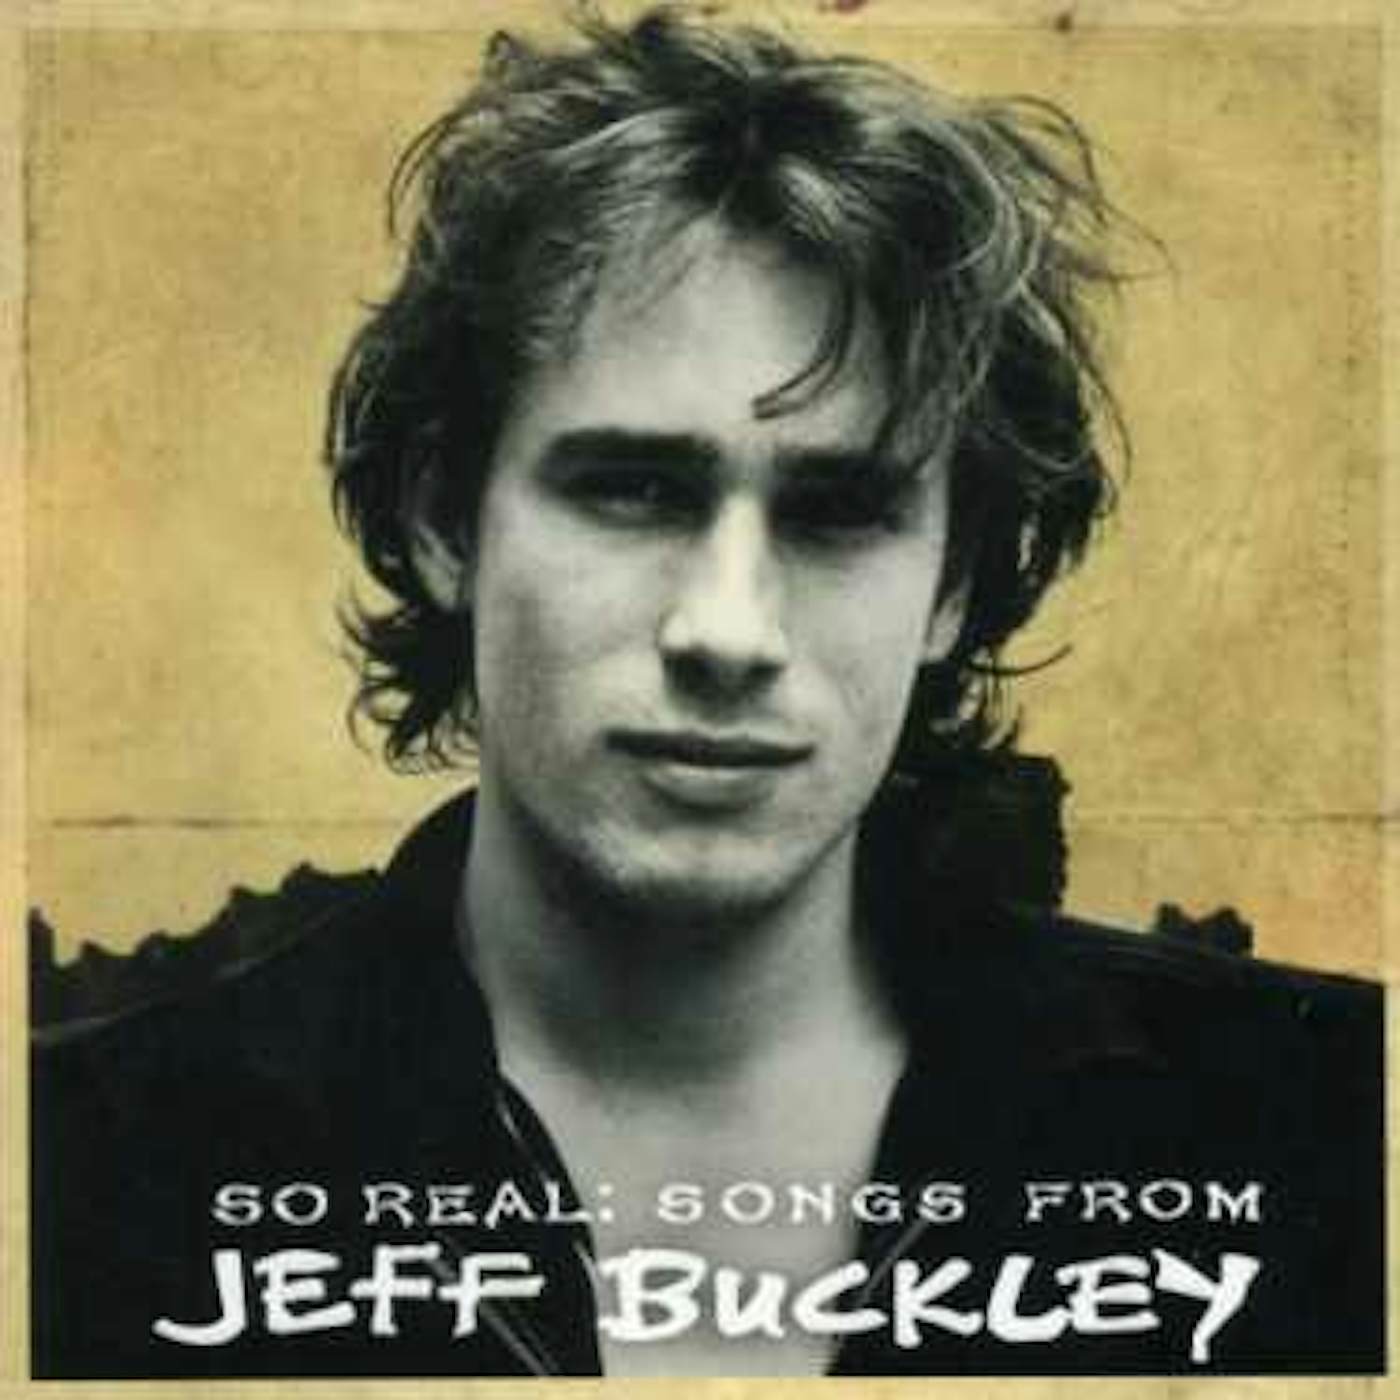 SO REAL: SONGS FROM JEFF BUCKLEY CD